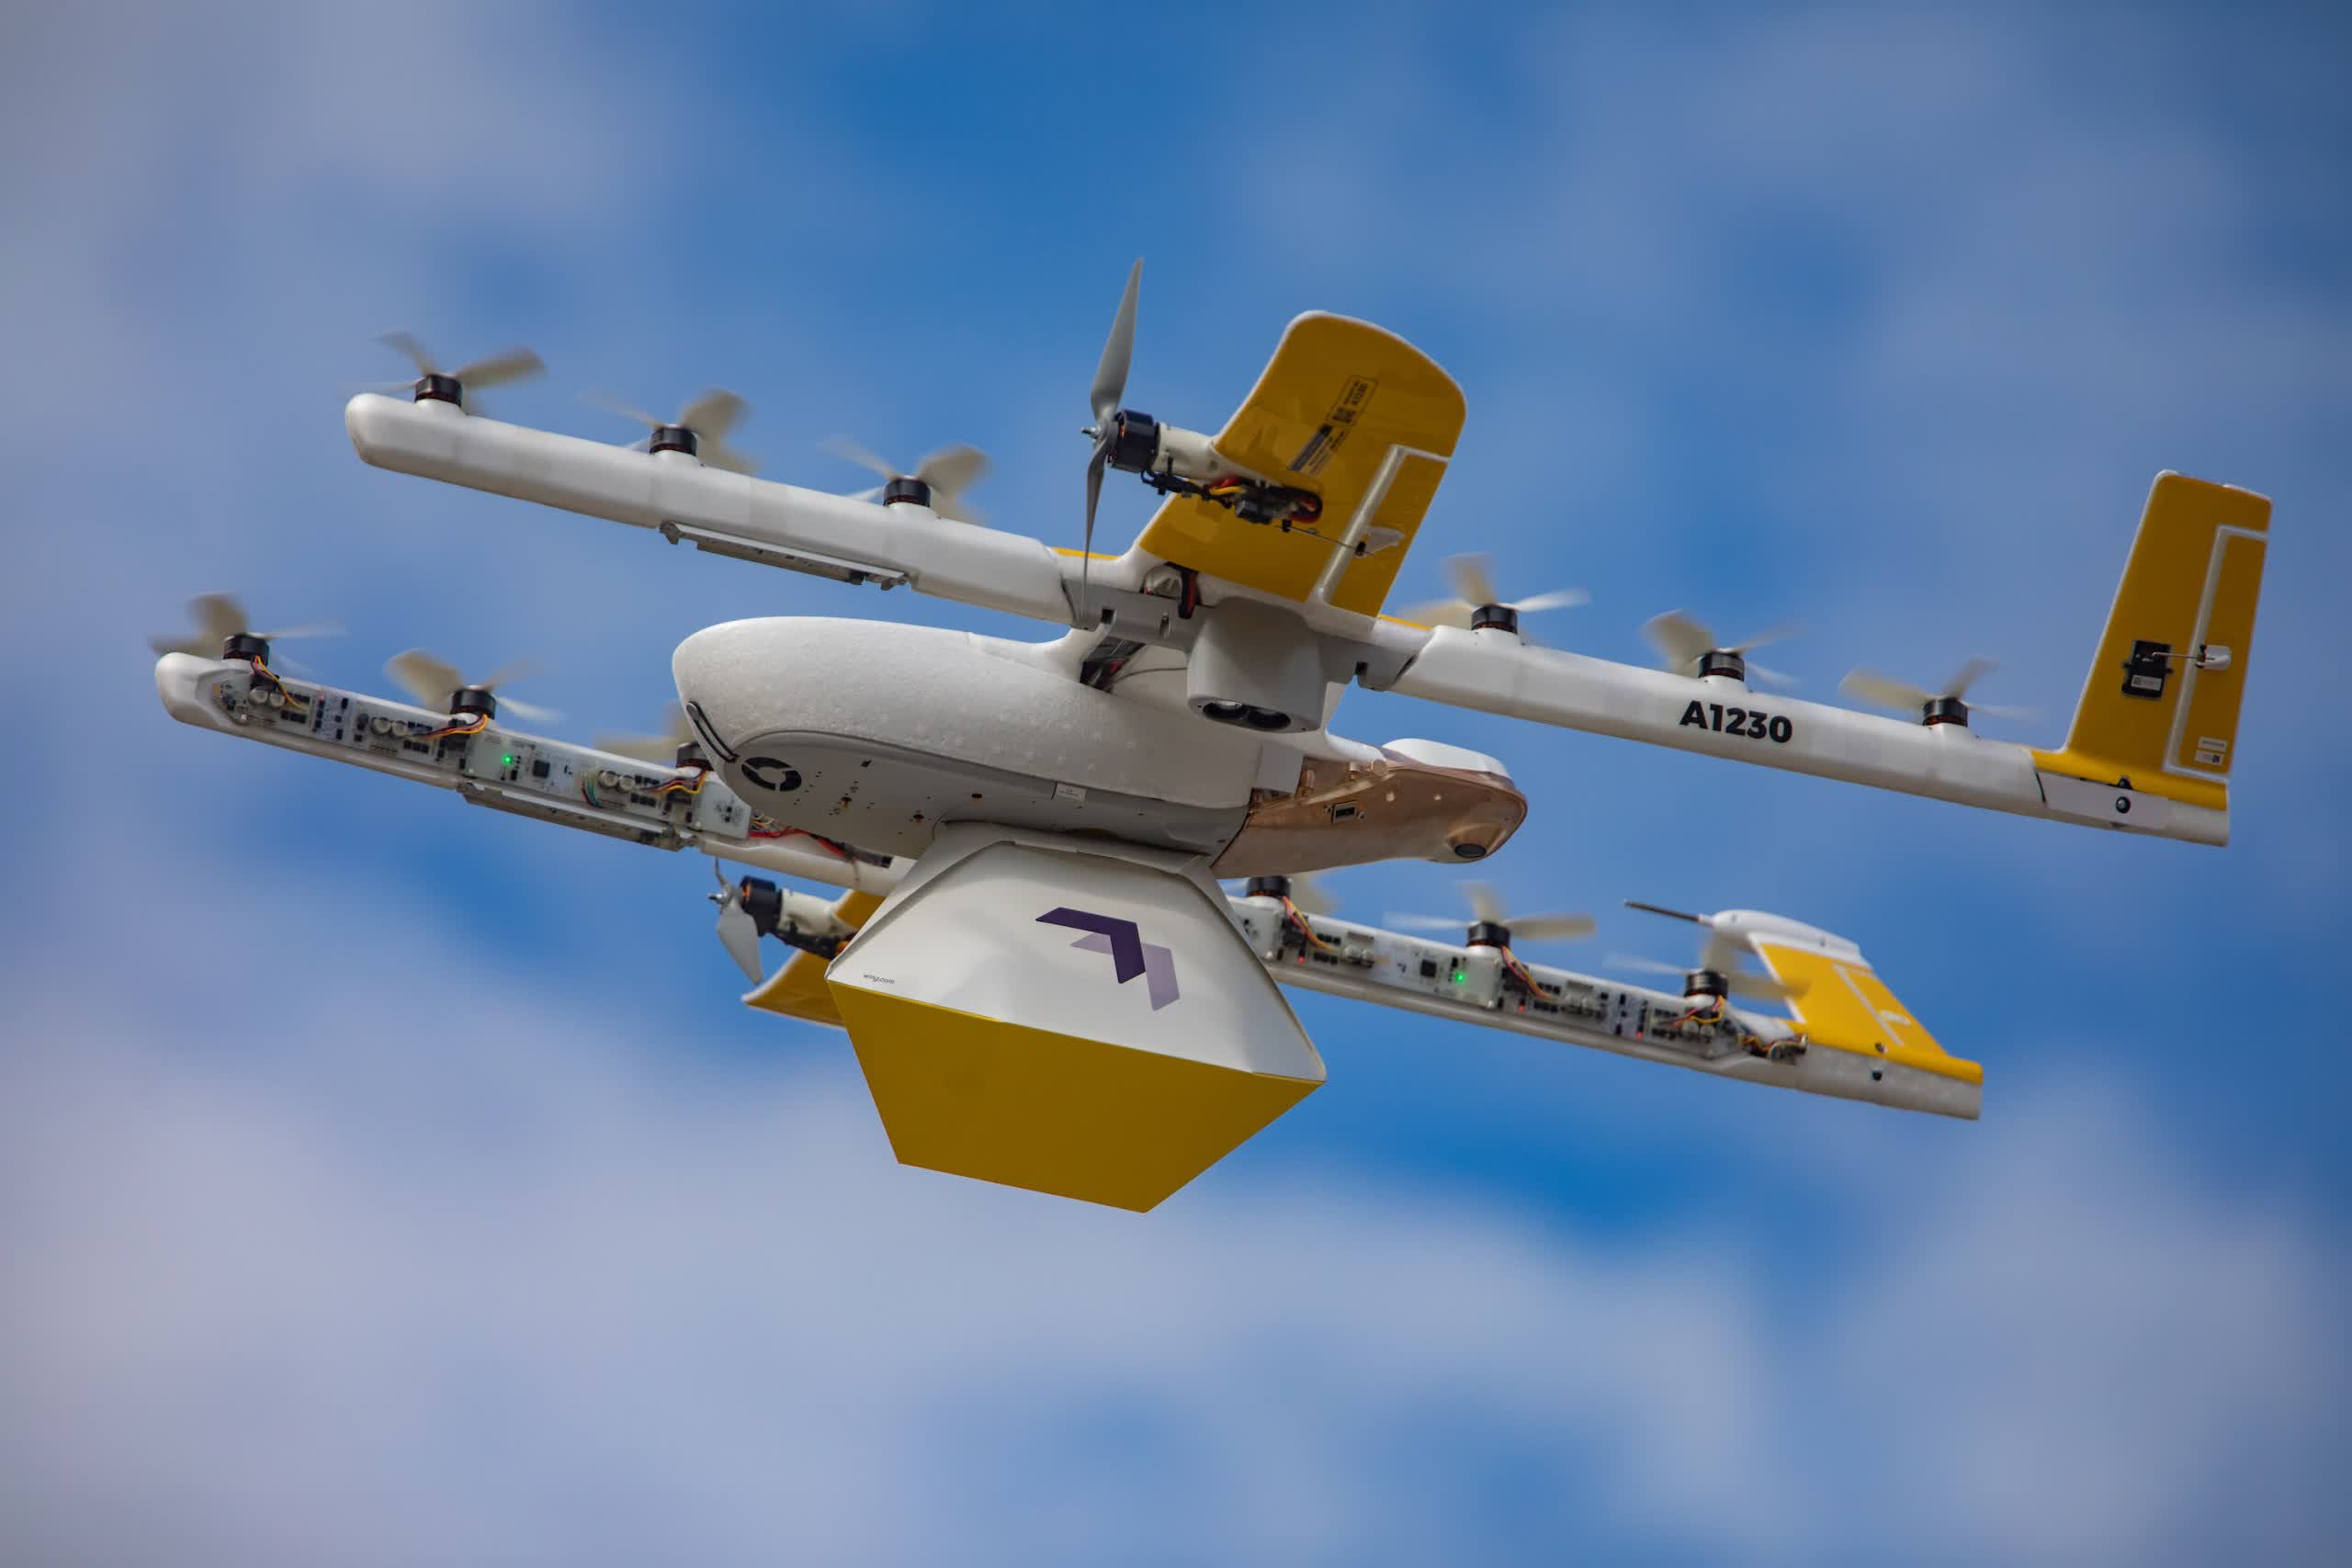 Google lost a food delivery drone when it tried to land on a power line and got incinerated